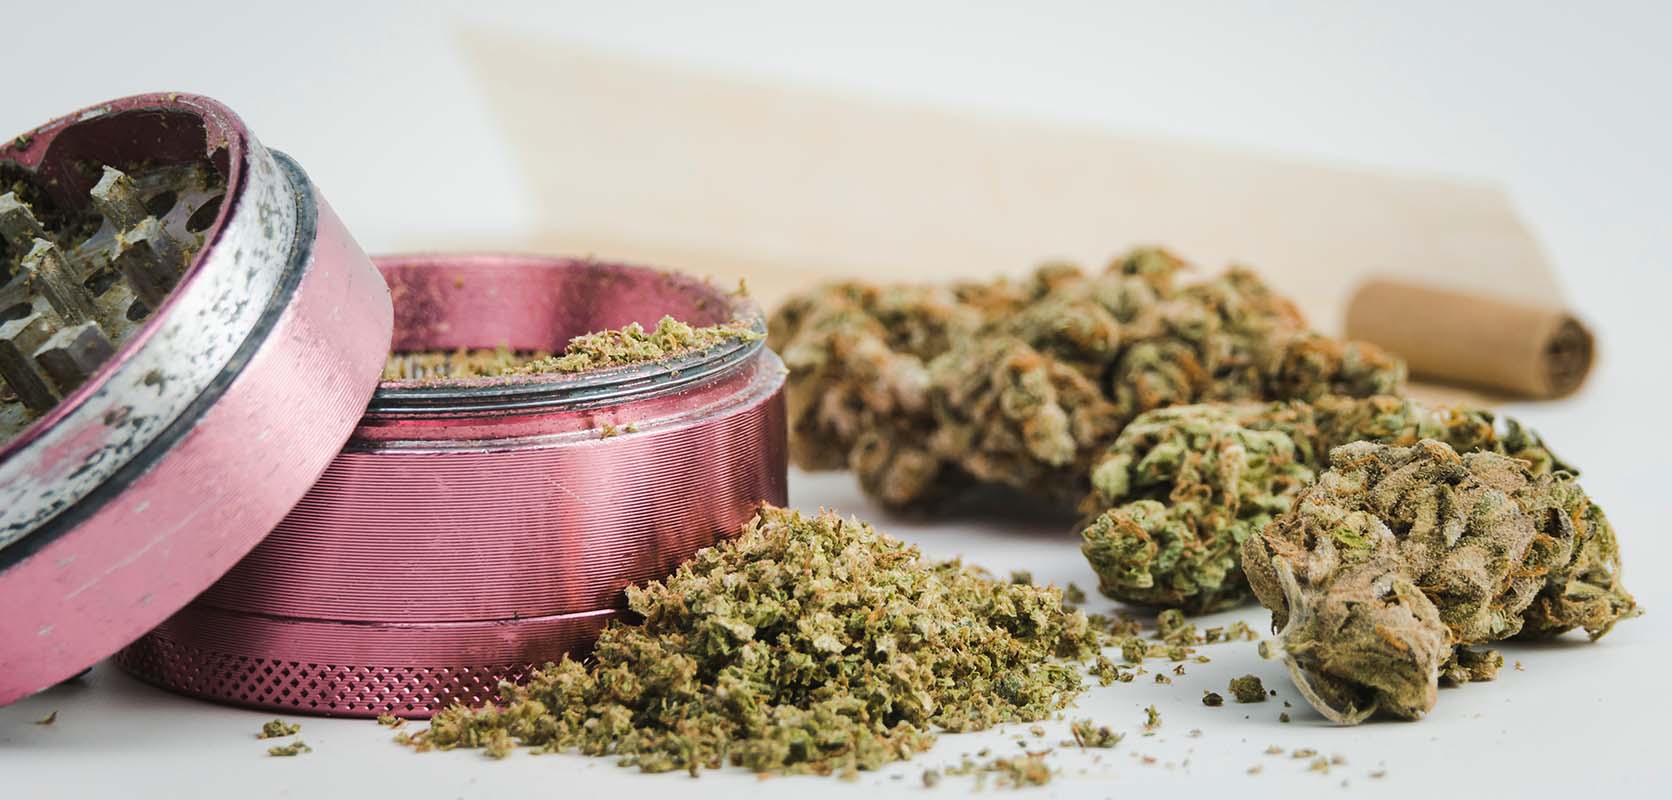 photo of weed being grinded in a grinder. order weed online in canada from the #1 online dispensary.